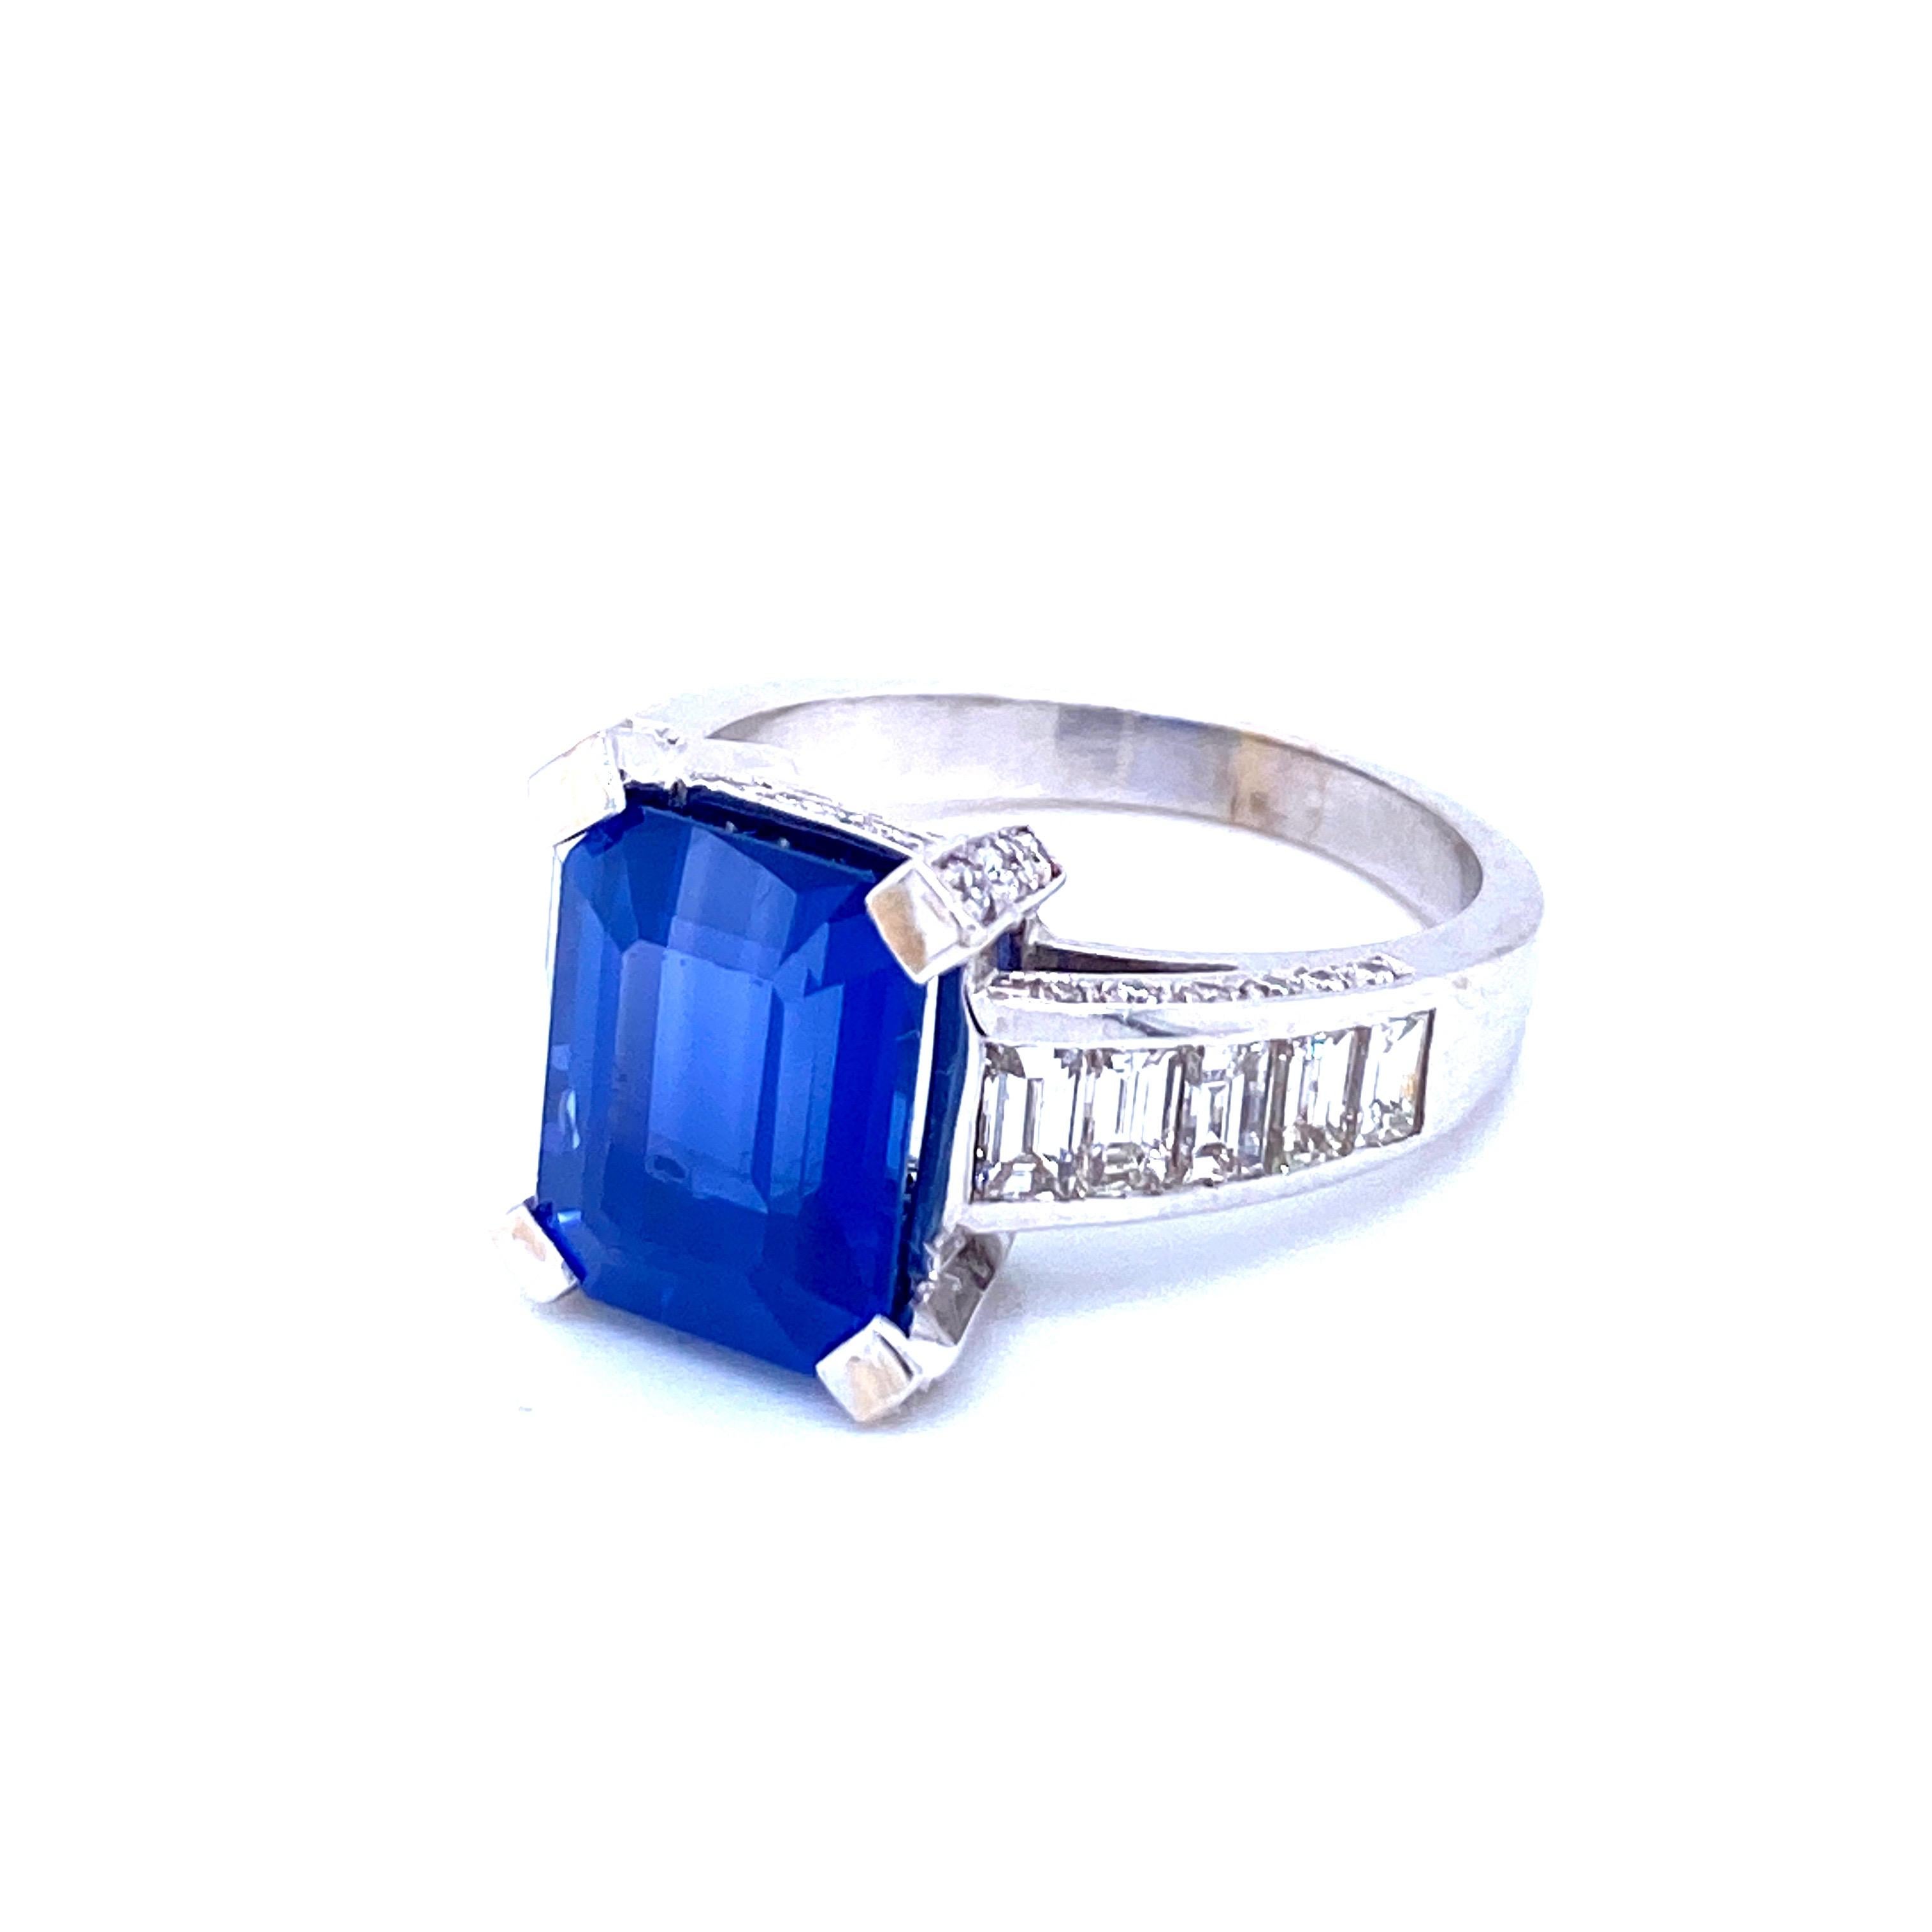 Women's GIA Certified 6.59 Carat Sapphire Diamond Gold Ring For Sale